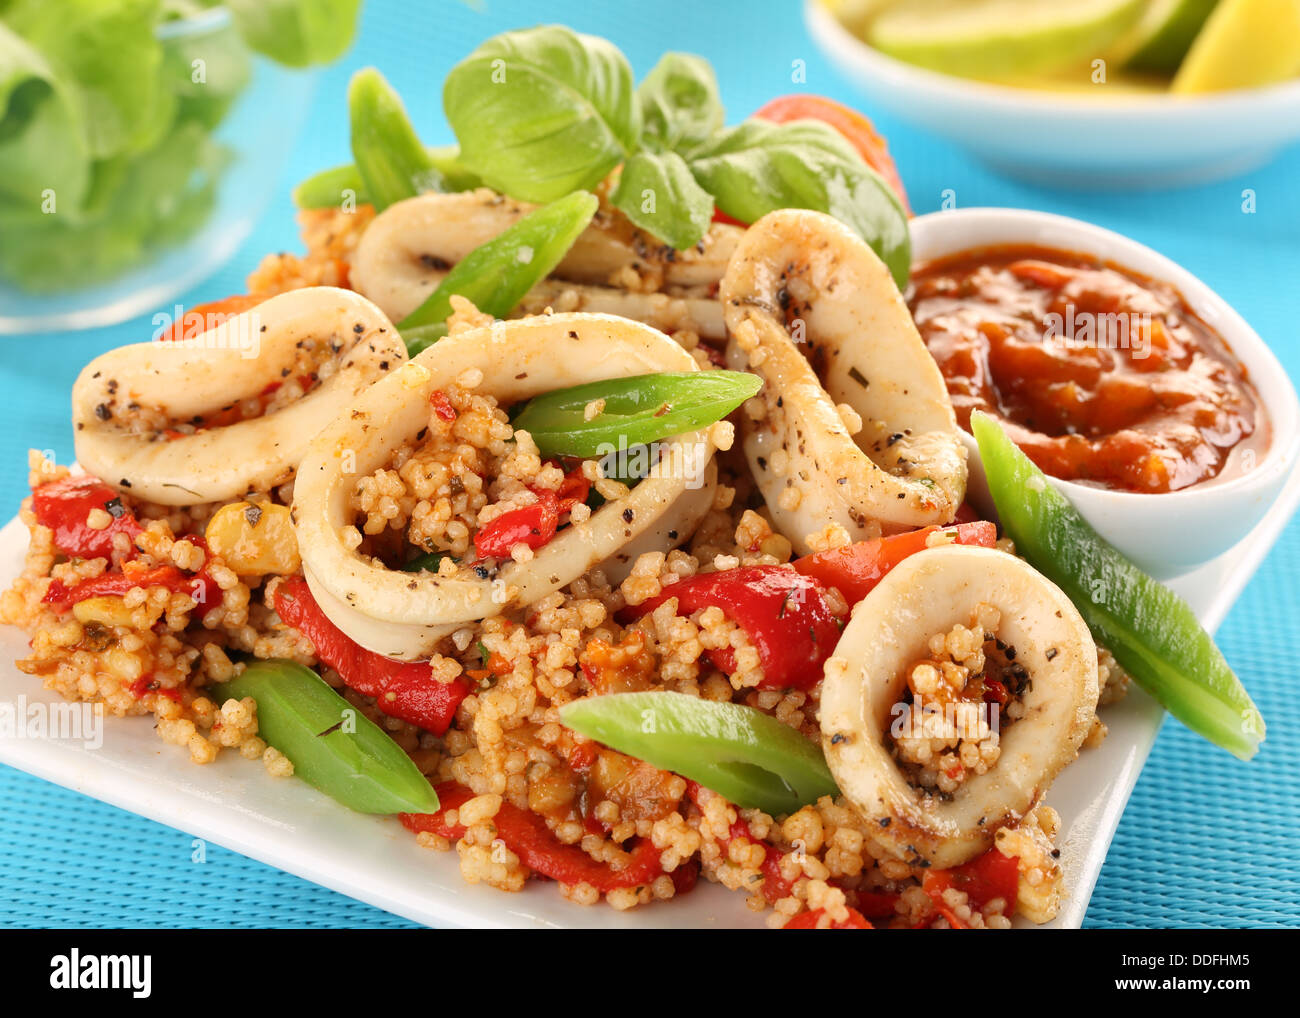 SQUID OR CALAMARI AND COUSCOUS SALAD WITH PEPPERS AND GREEN BEANS Stock Photo